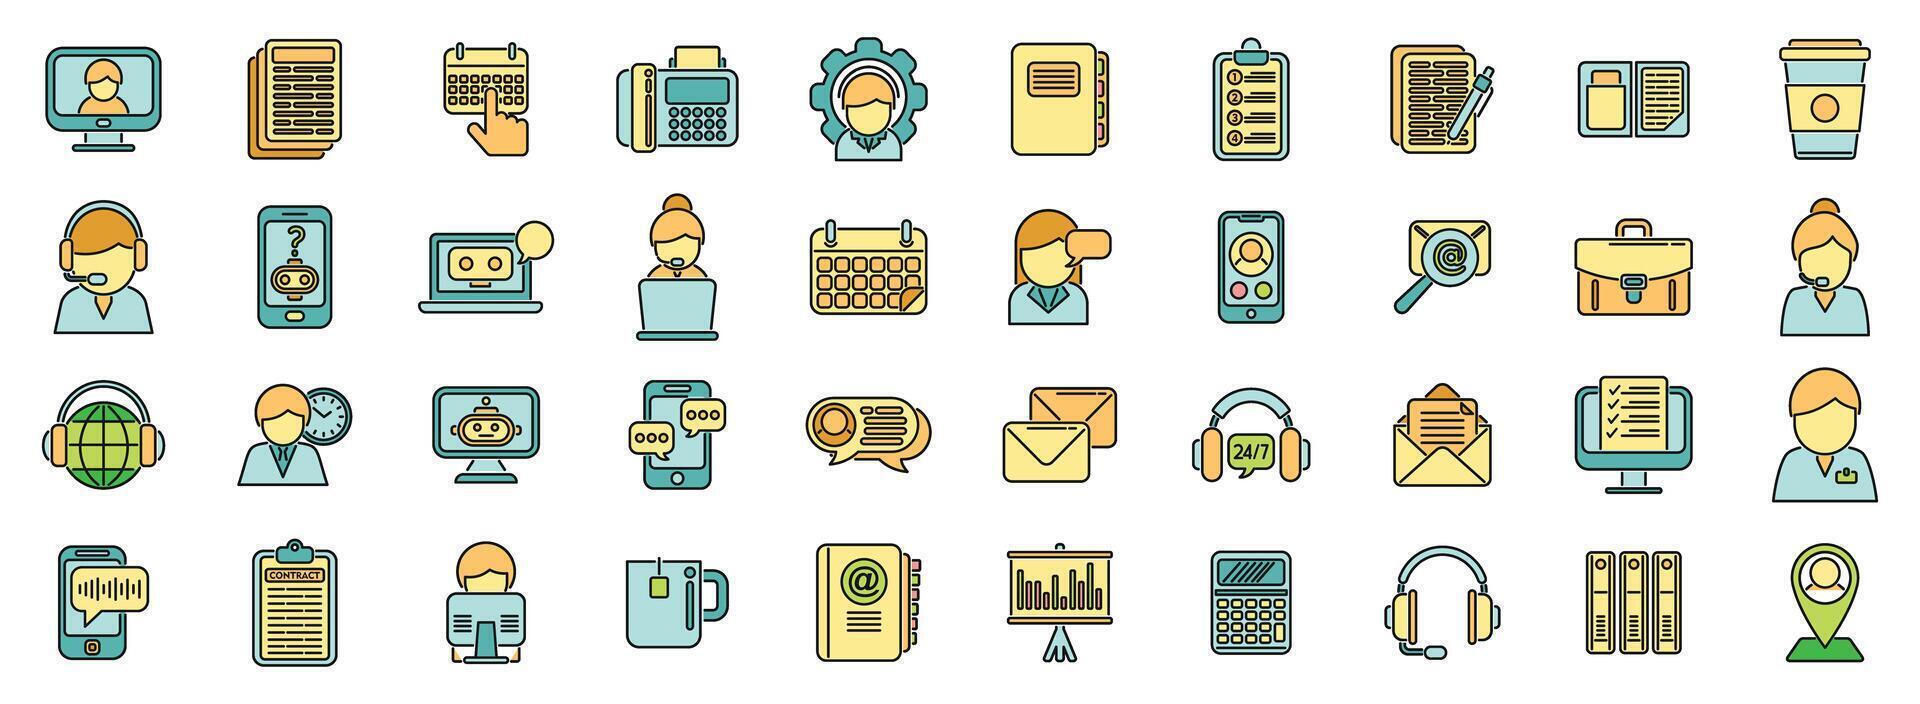 Personal assistant icons set color line vector